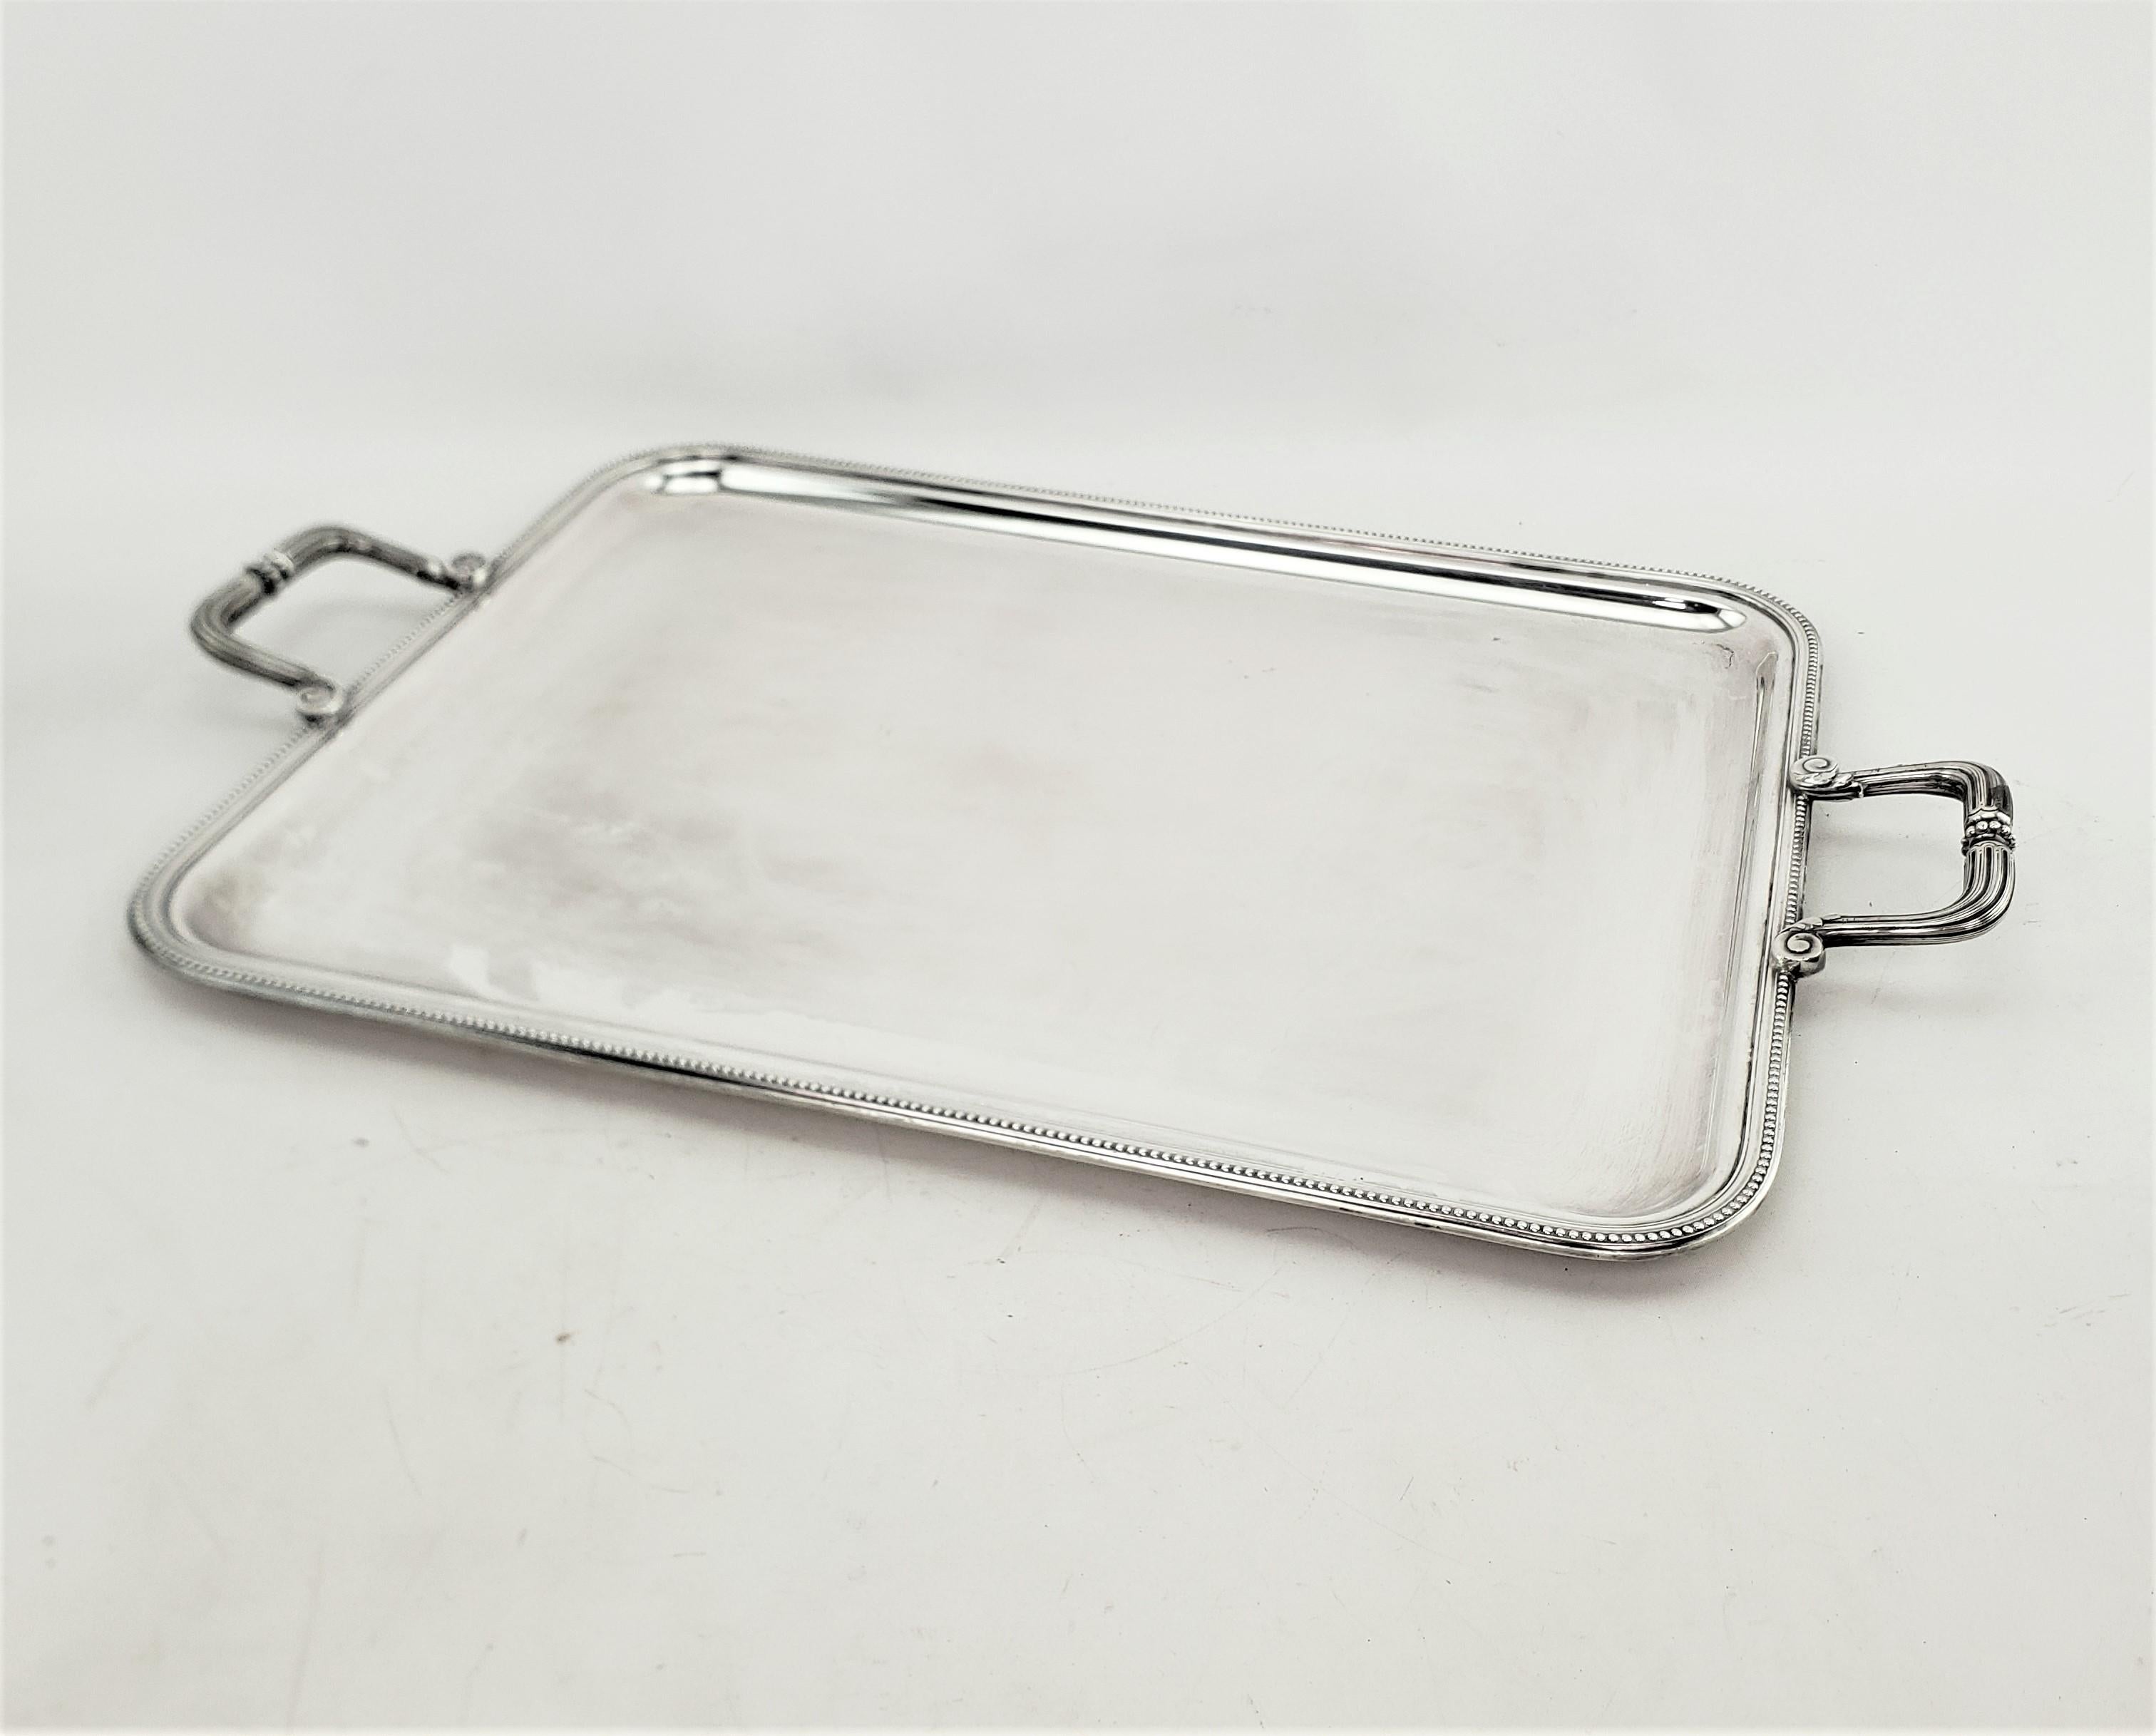 Mid Century Era Christofle Silver Plated Serving Tray with Stylized Rope Border In Good Condition For Sale In Hamilton, Ontario